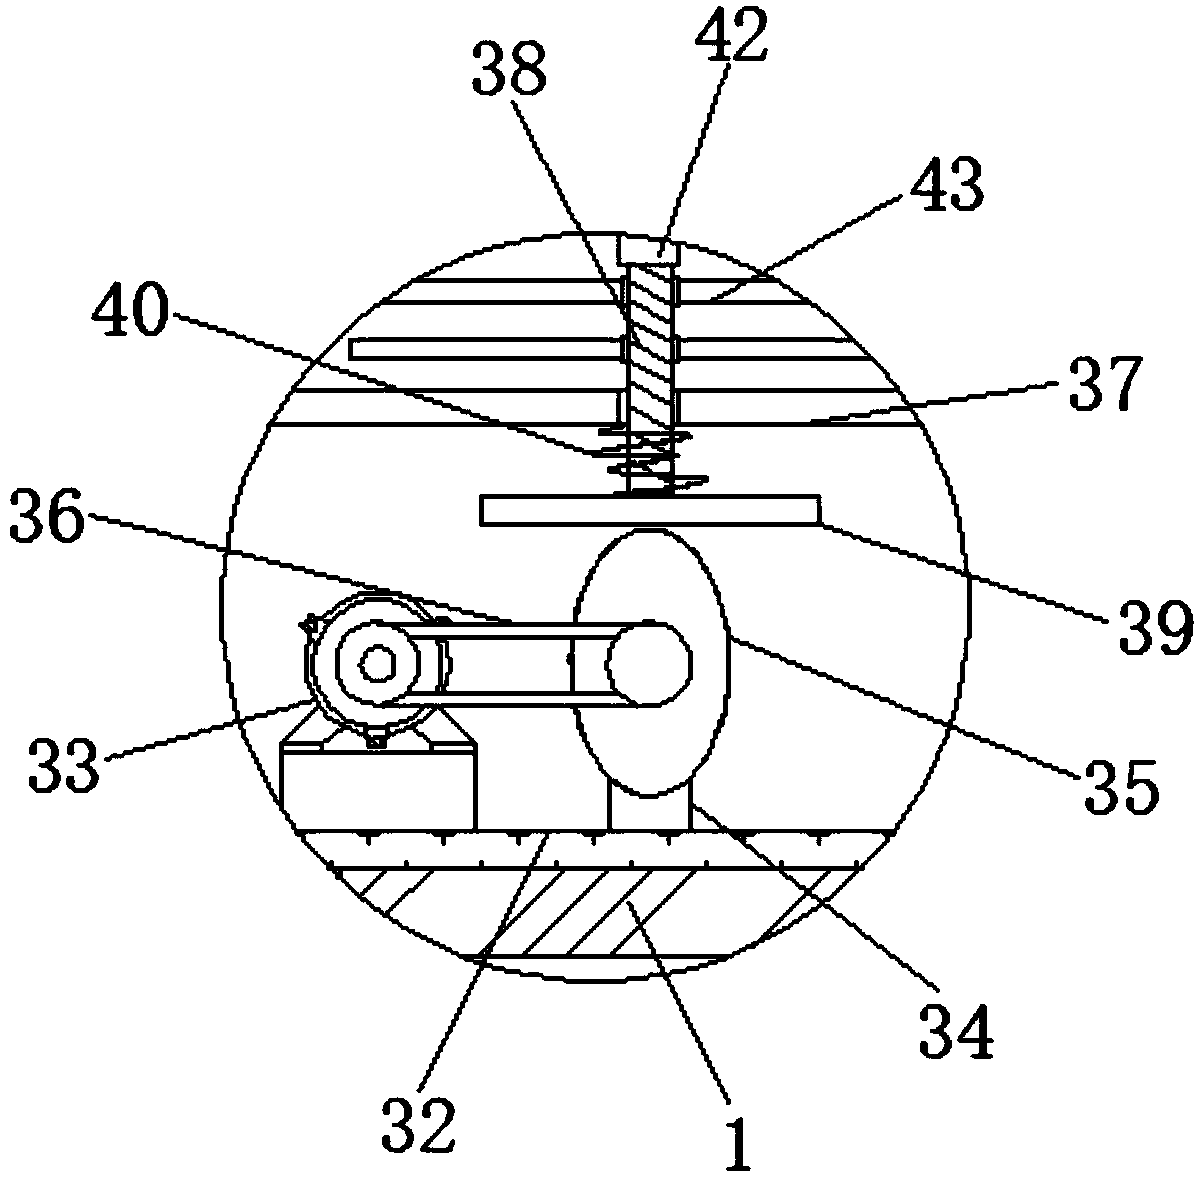 Welding device with welding fume removal function